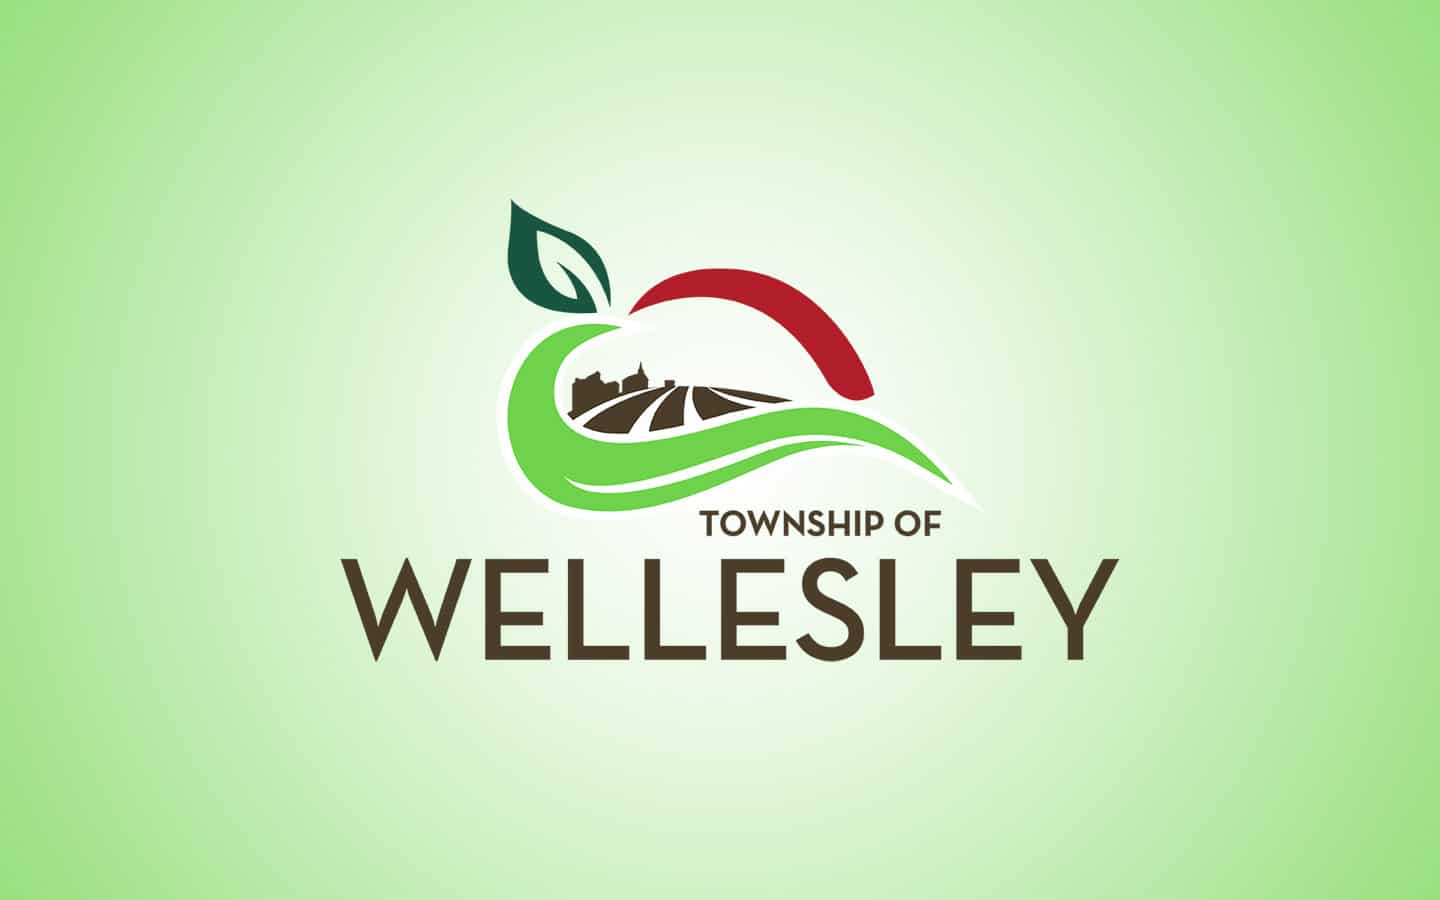                      Wellesley approves budget with 3.9% hike                             
                     